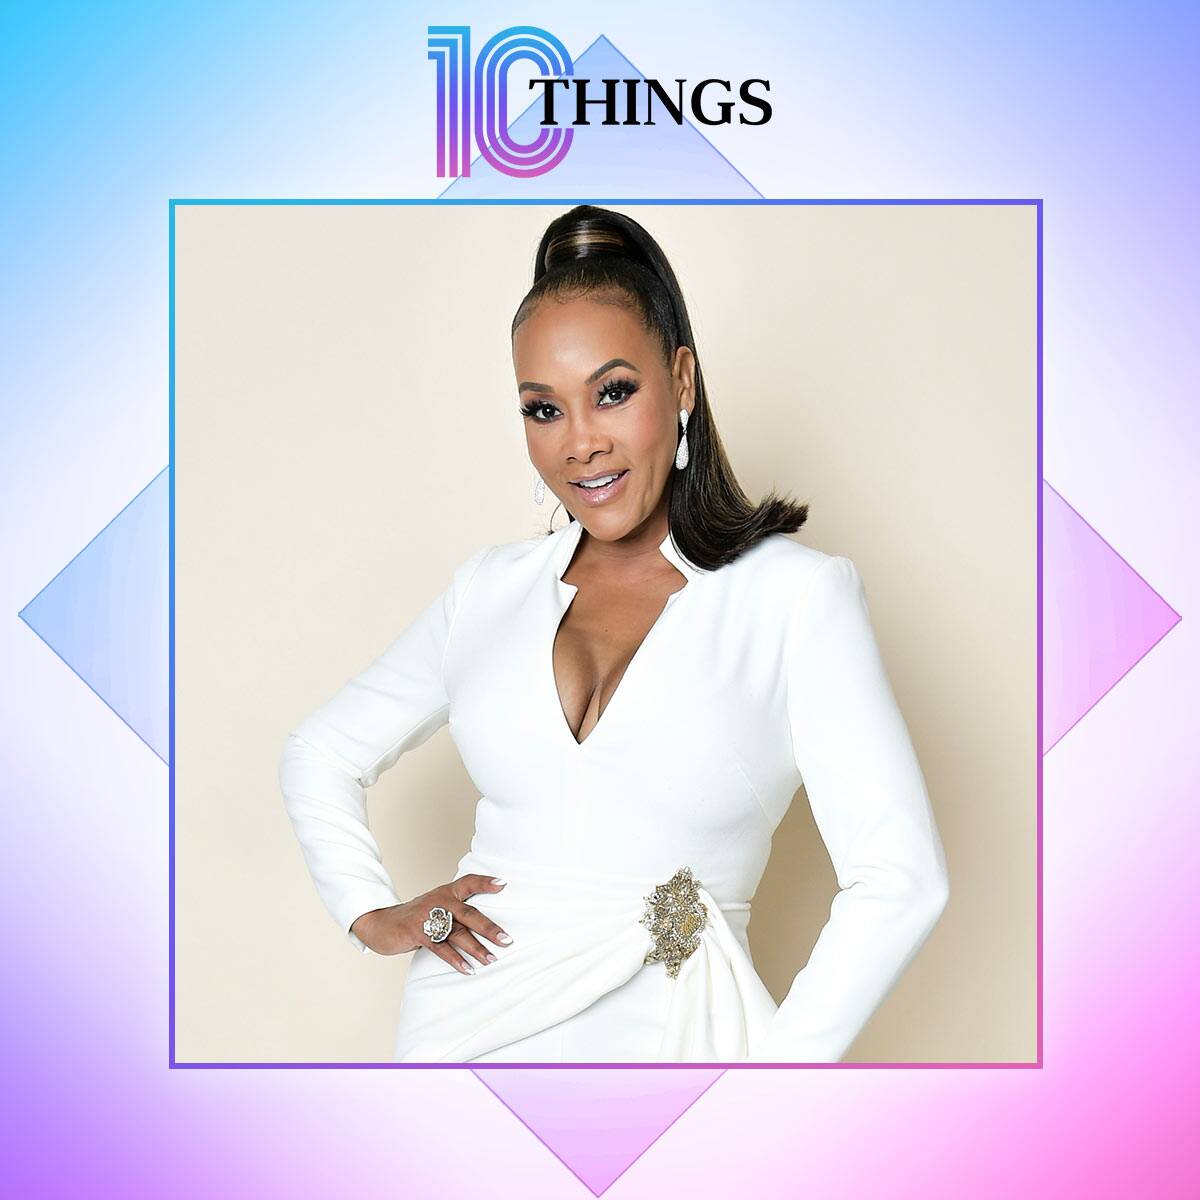 10 Things You Didn't Know About Vivica A. Fox—By Vivica A. Fox